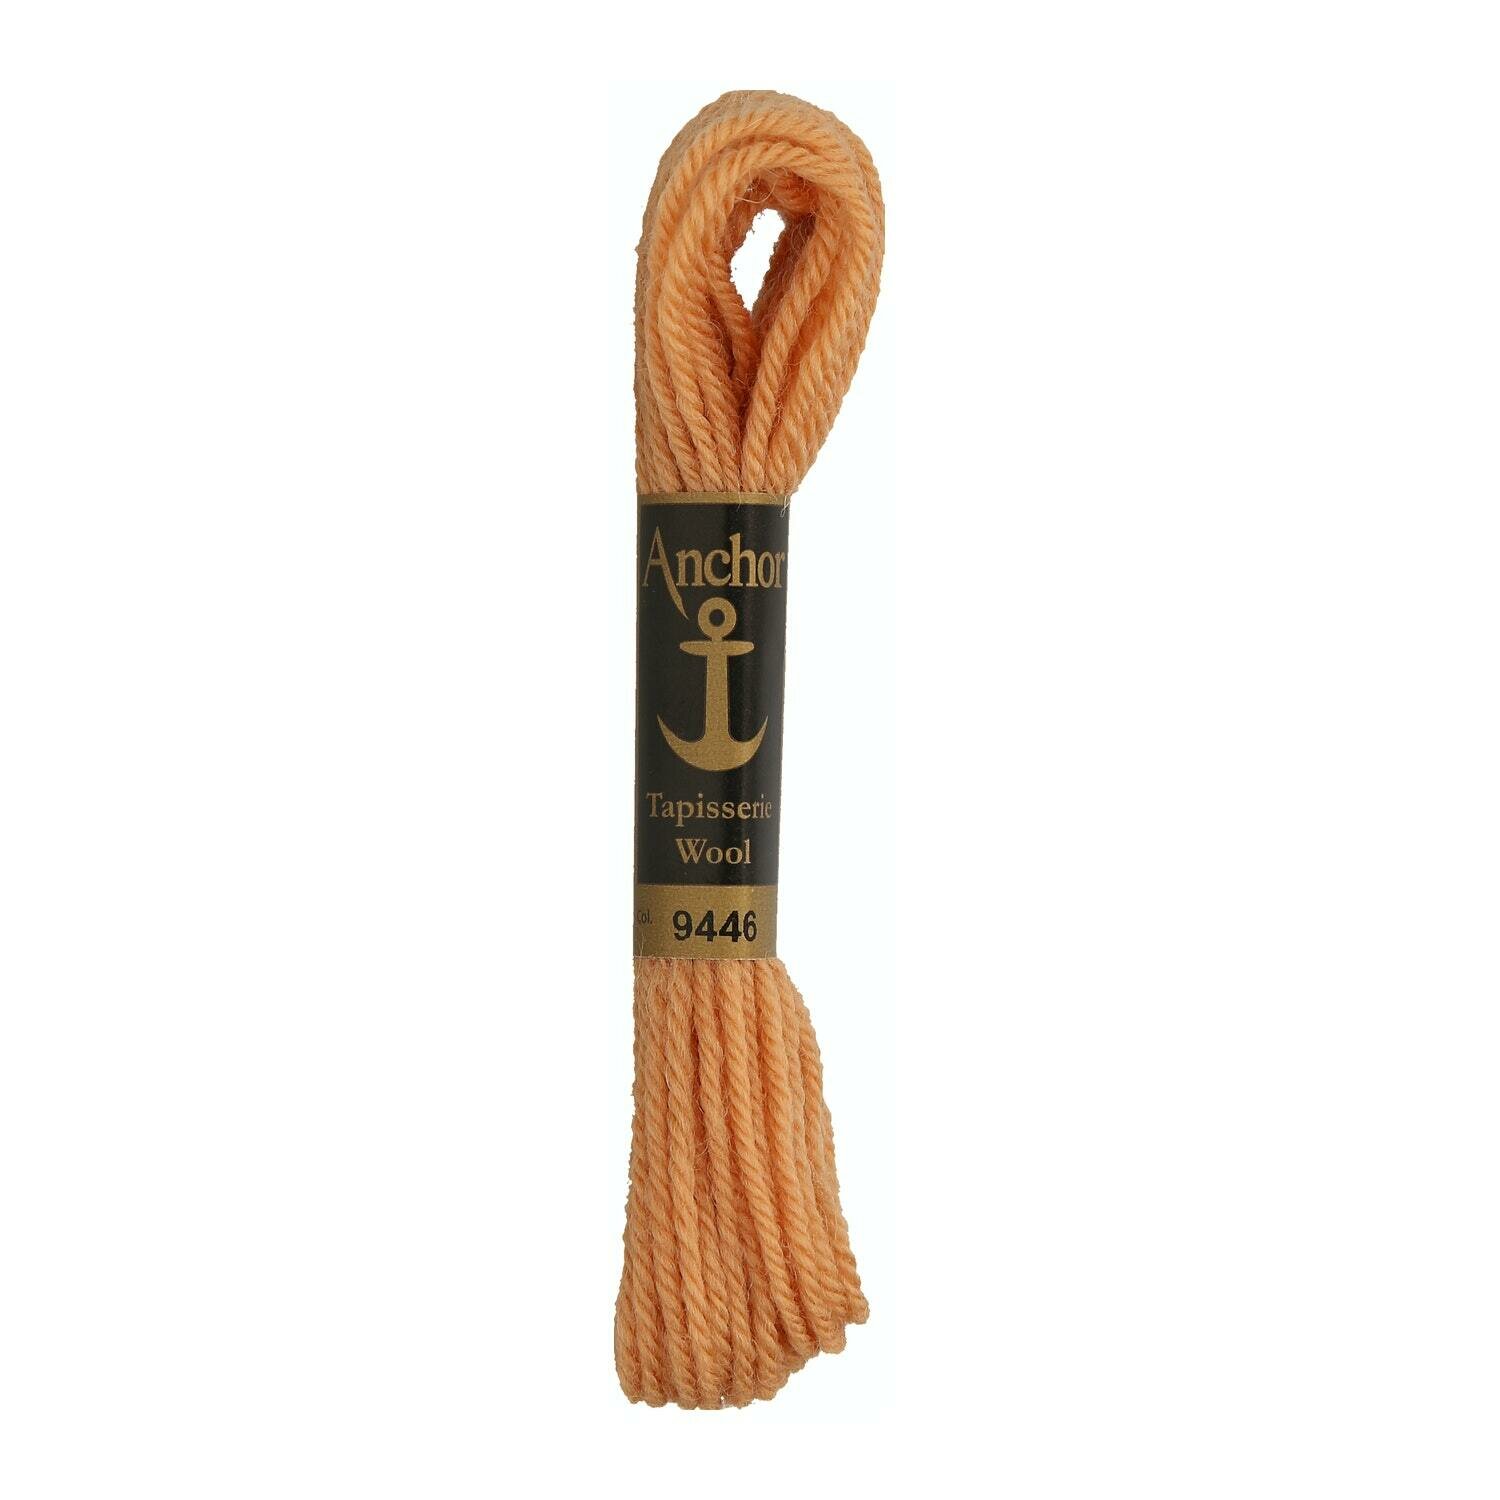 Anchor Tapisserie Wool # 09446